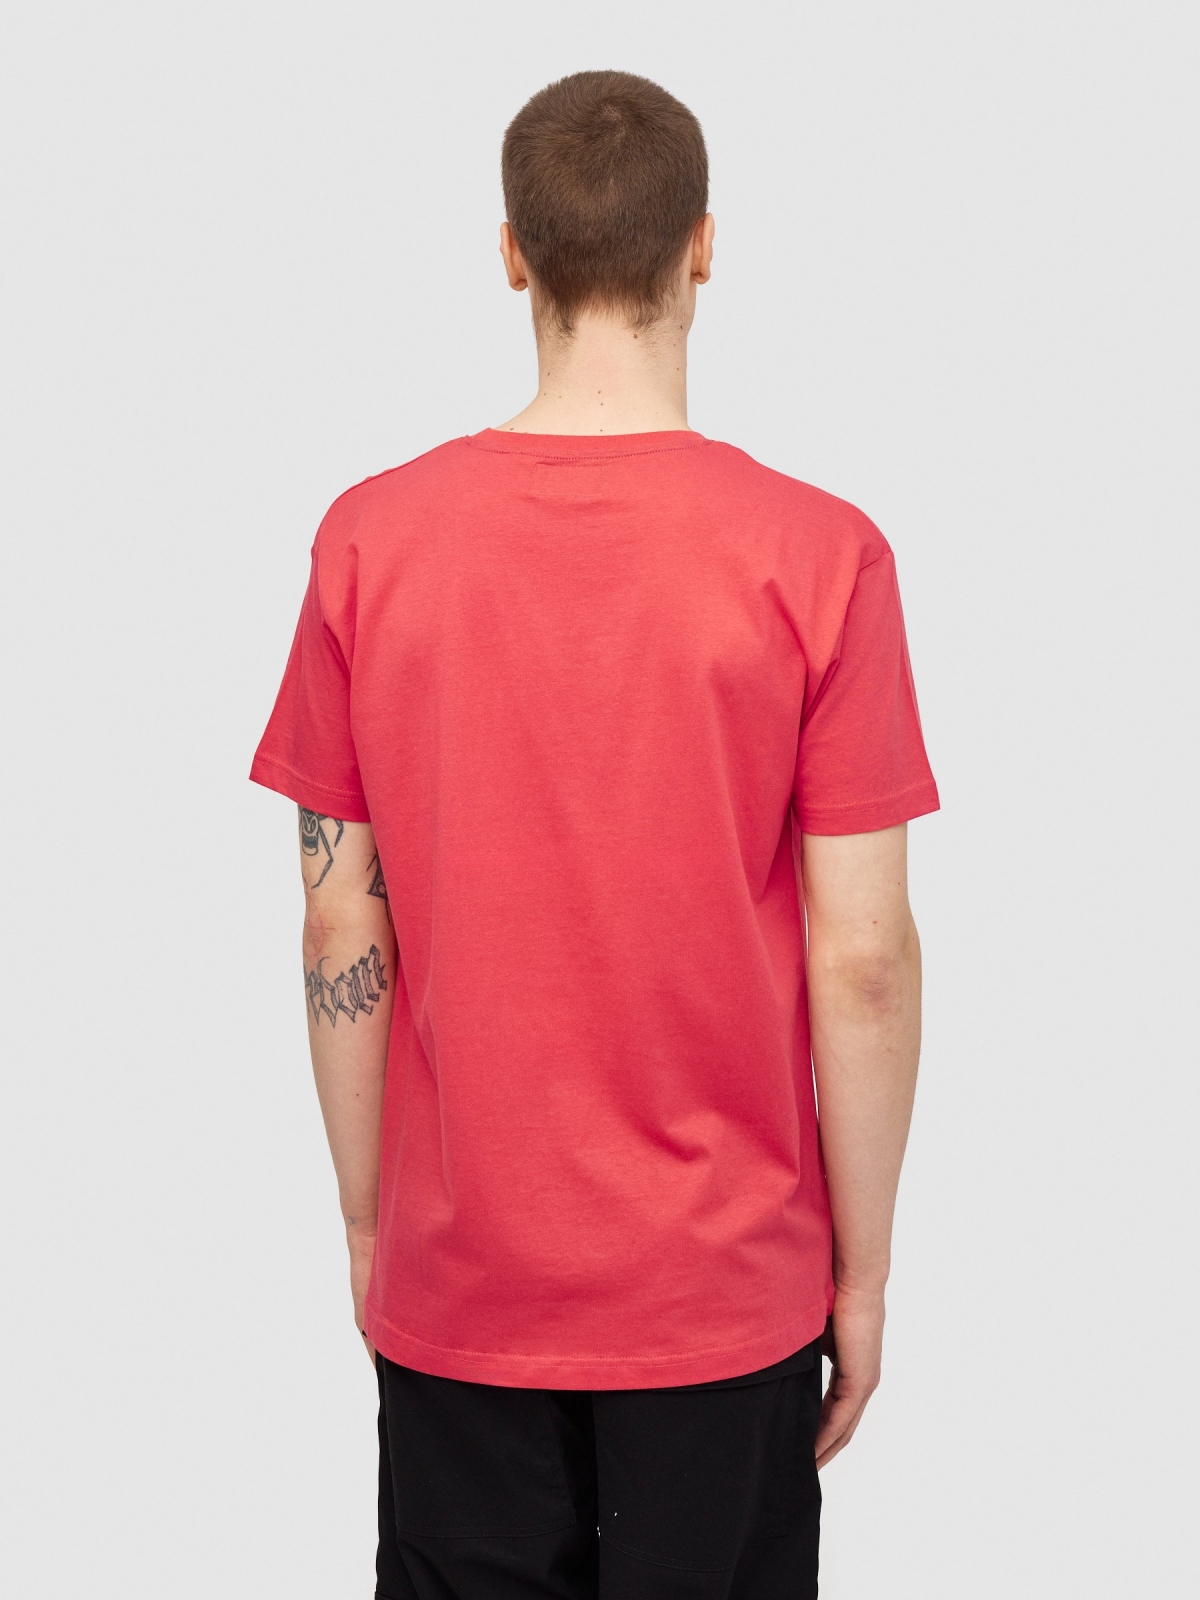 INSIDE urban T-shirt red middle back view